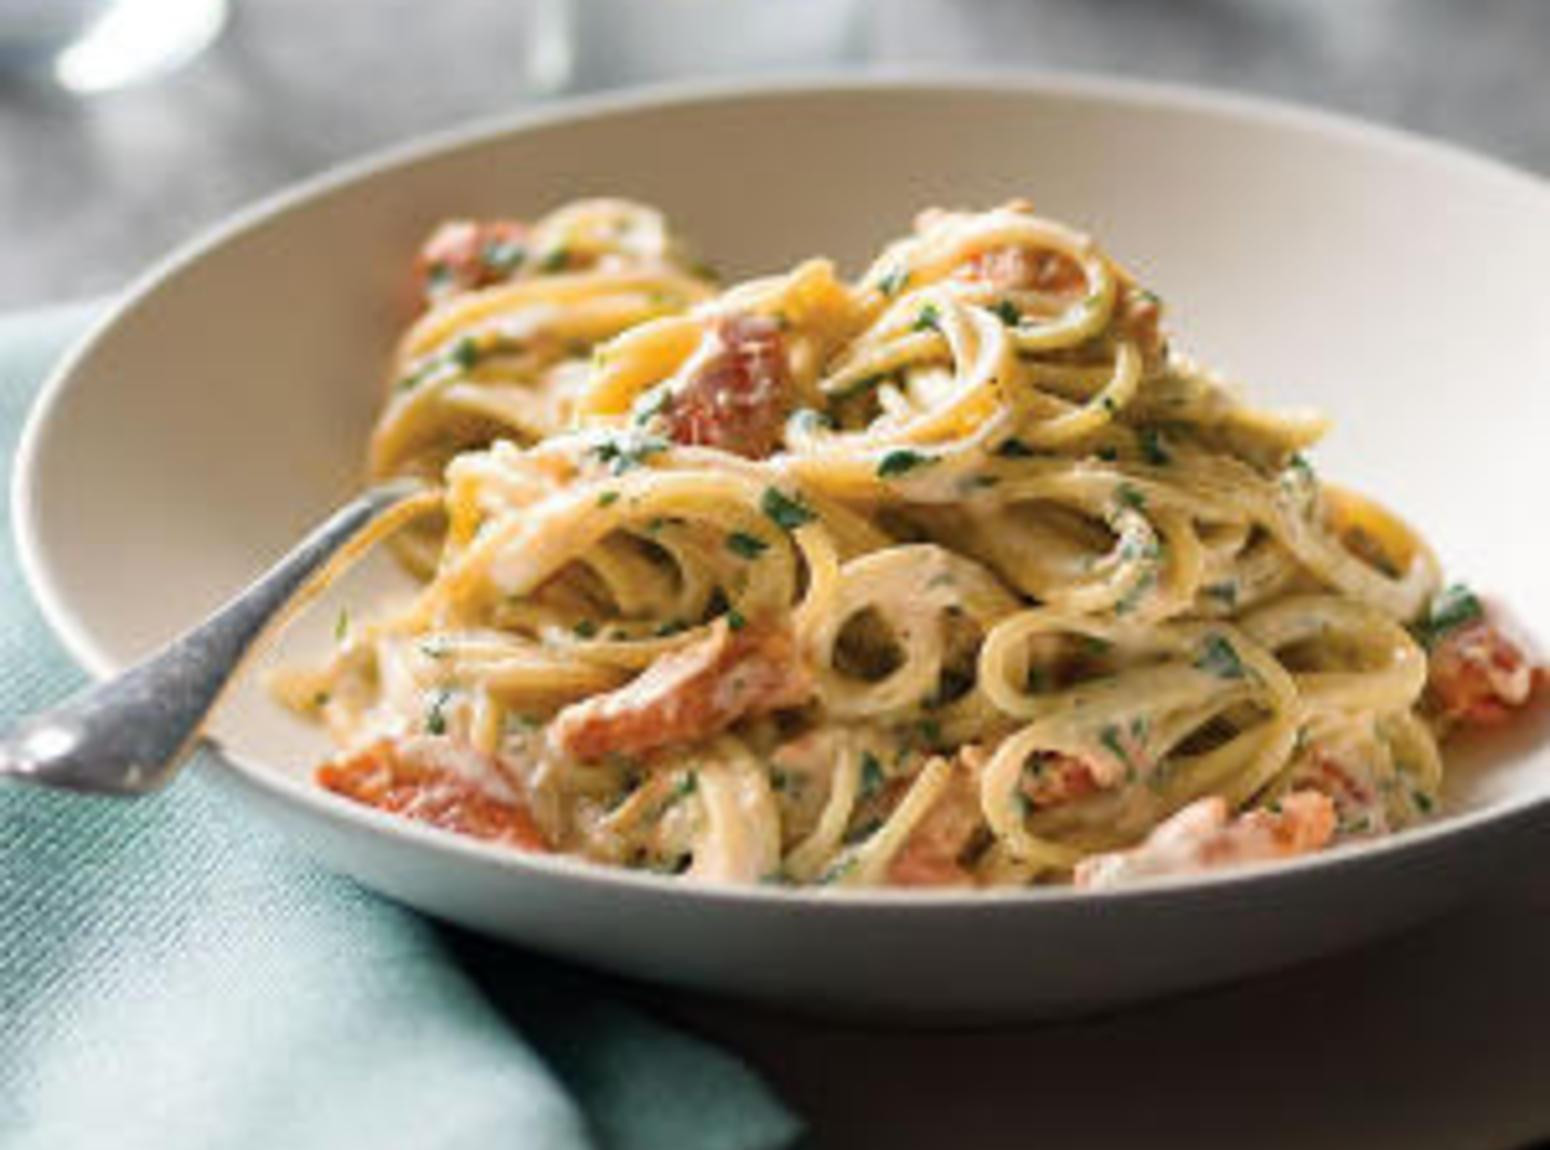 Recipes With Smoked Salmon
 Pasta with Smoked Salmon and Sun dried Tomatoes Recipe